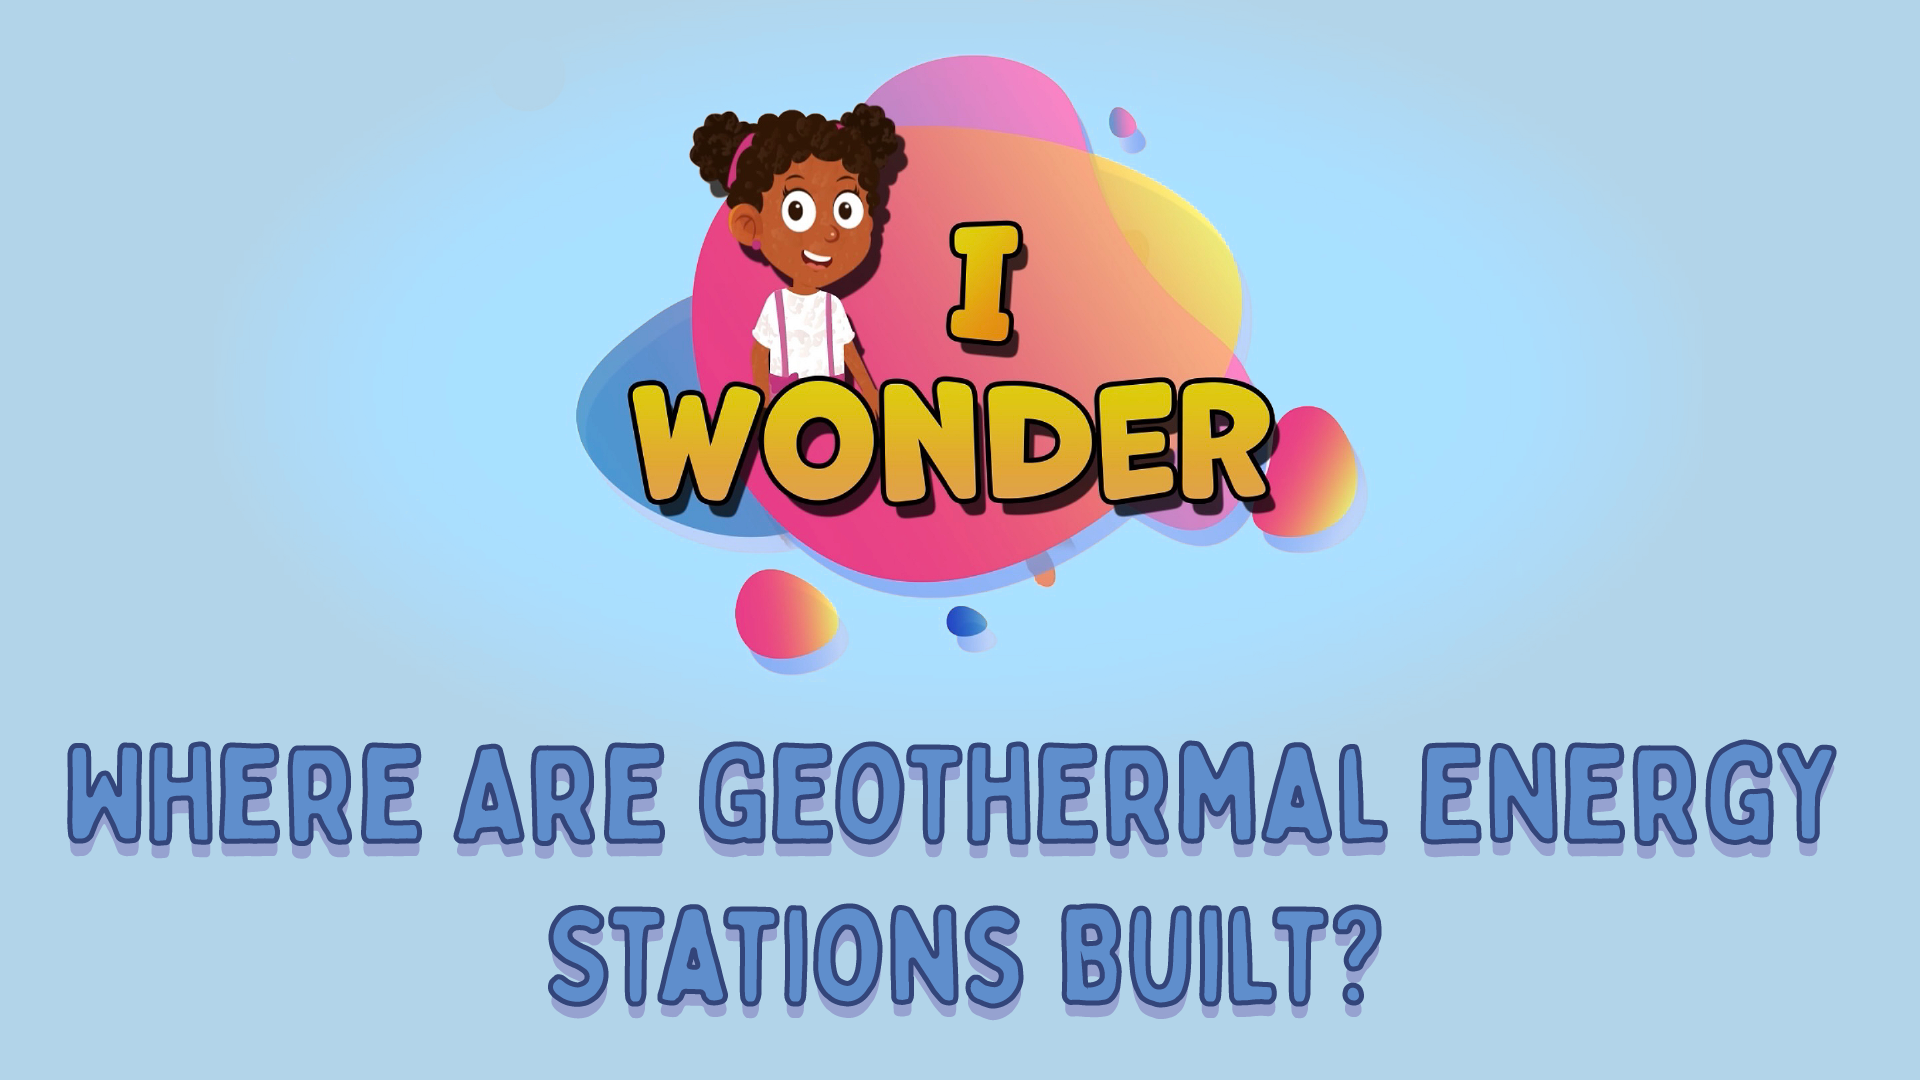 Where Are Geothermal Energy Stations Built